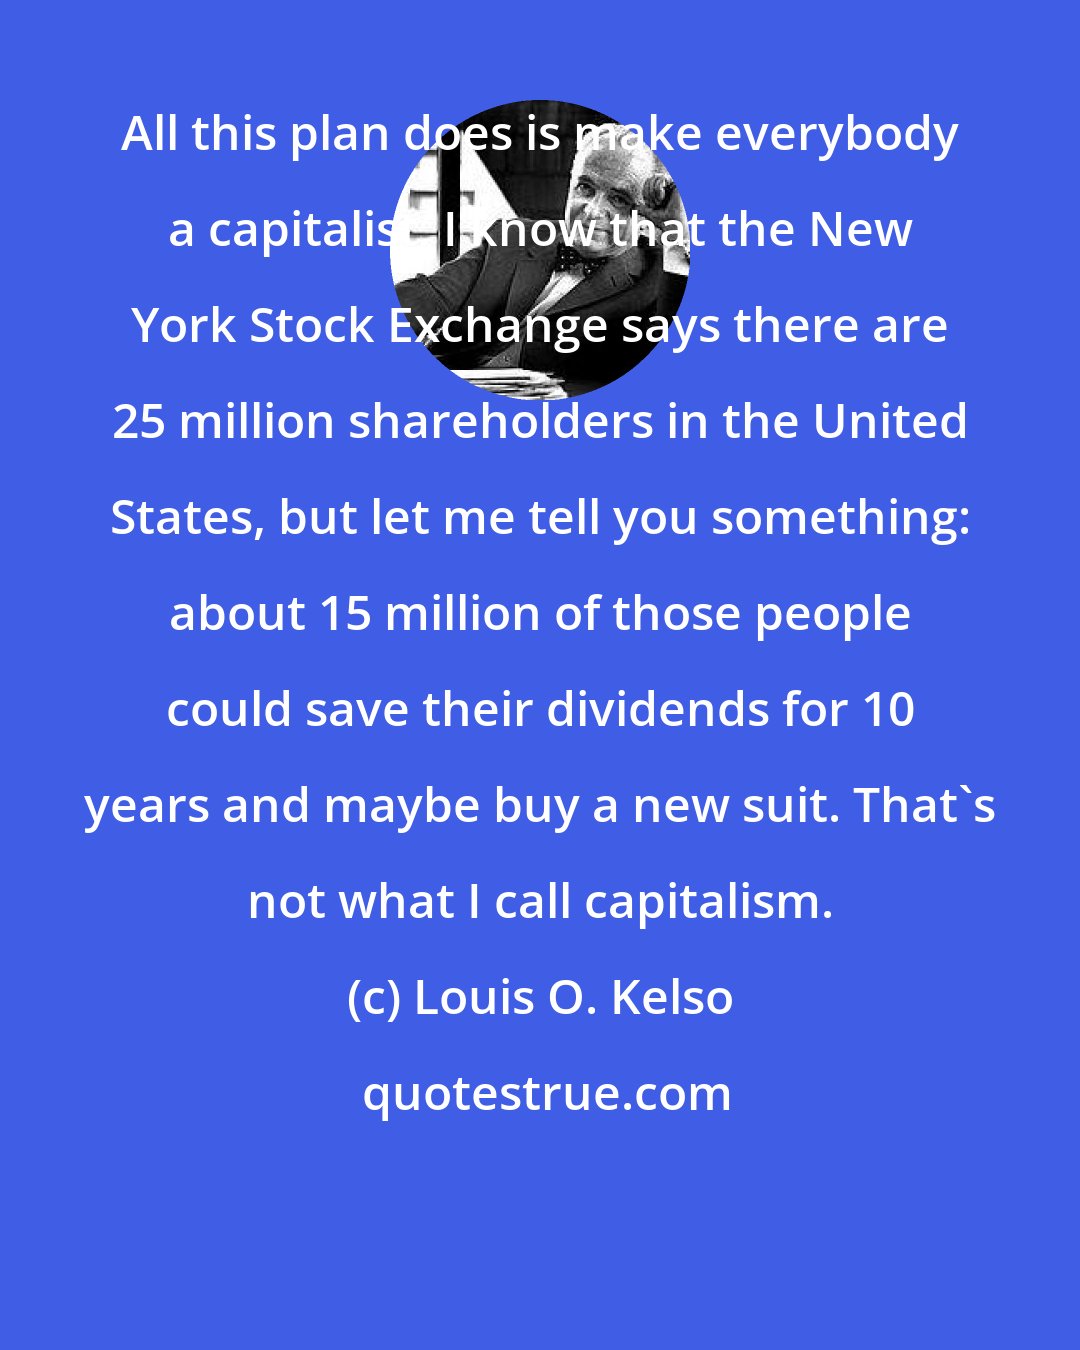 Louis O. Kelso: All this plan does is make everybody a capitalist. I know that the New York Stock Exchange says there are 25 million shareholders in the United States, but let me tell you something: about 15 million of those people could save their dividends for 10 years and maybe buy a new suit. That's not what I call capitalism.